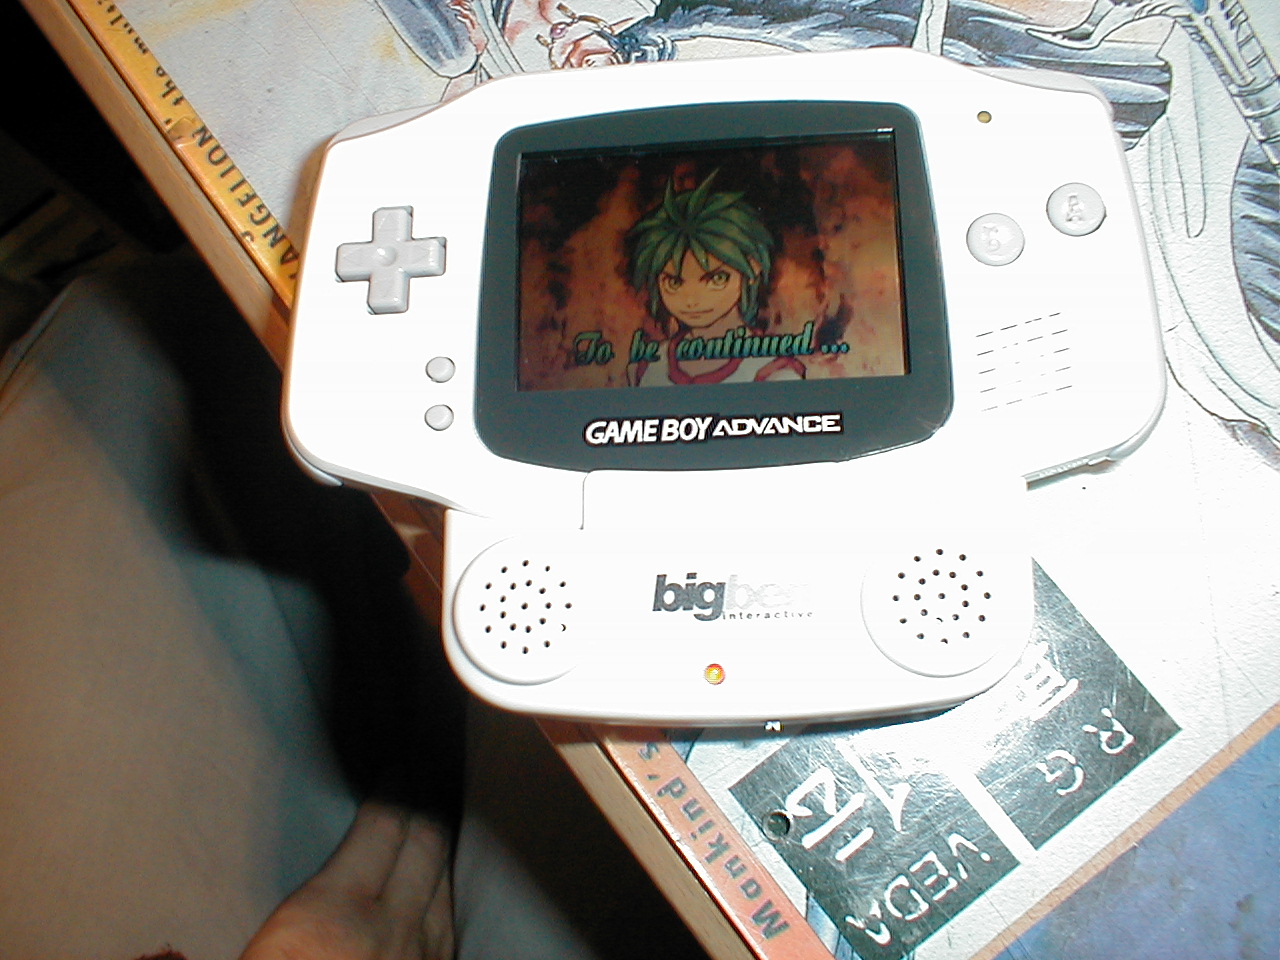 dario gameboy advance gba anime game Japanese white plastic handheld gaming device to be continued free